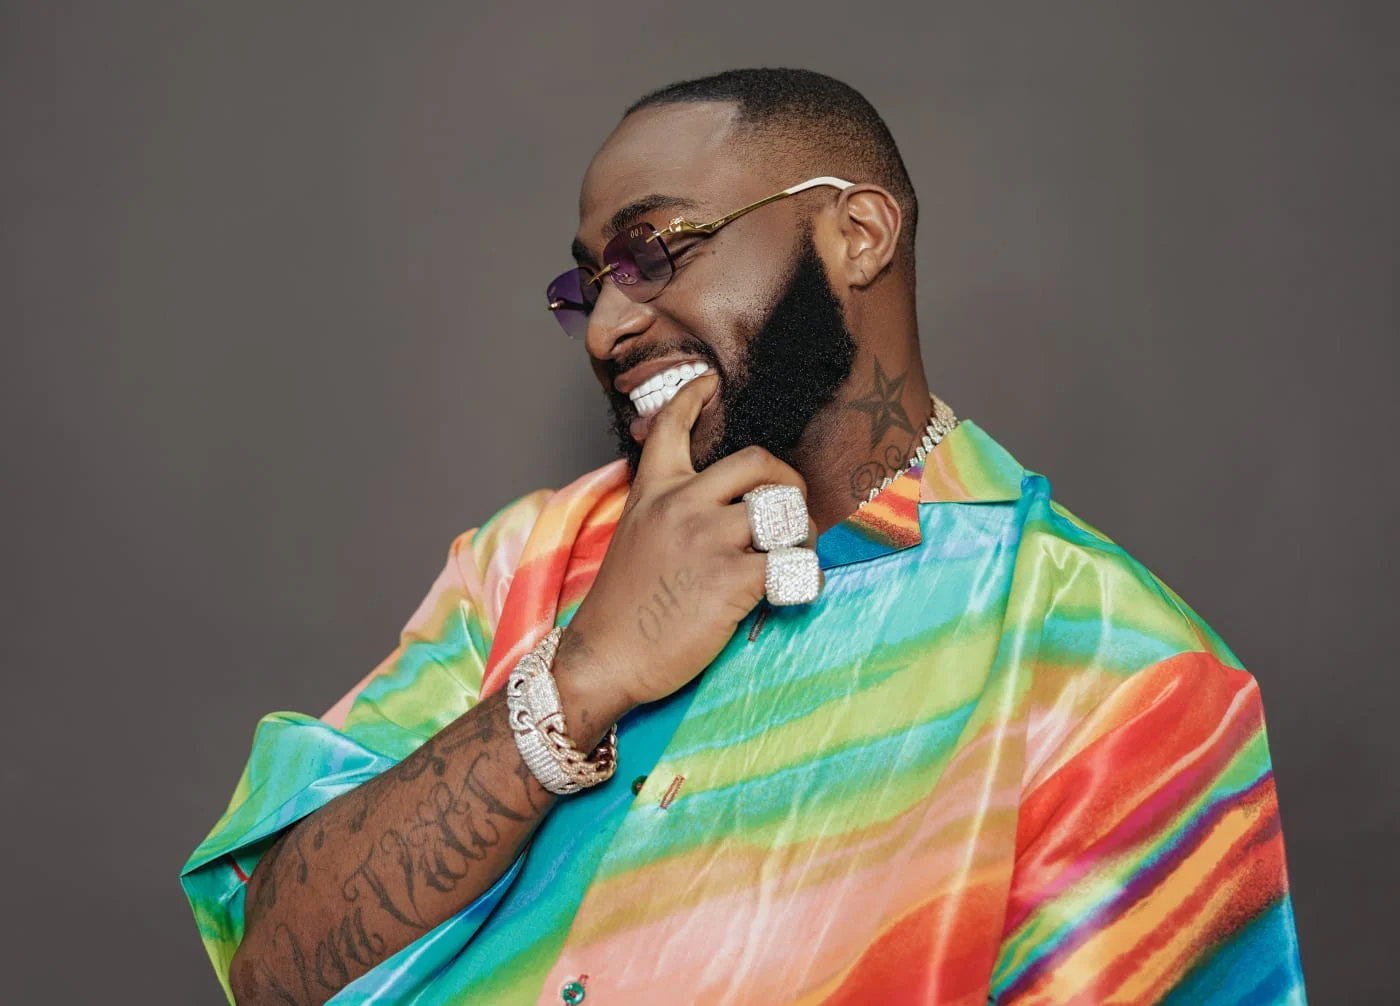 Davido Announces End of ‘Timeless’ Era, Teases New Music and Milestones